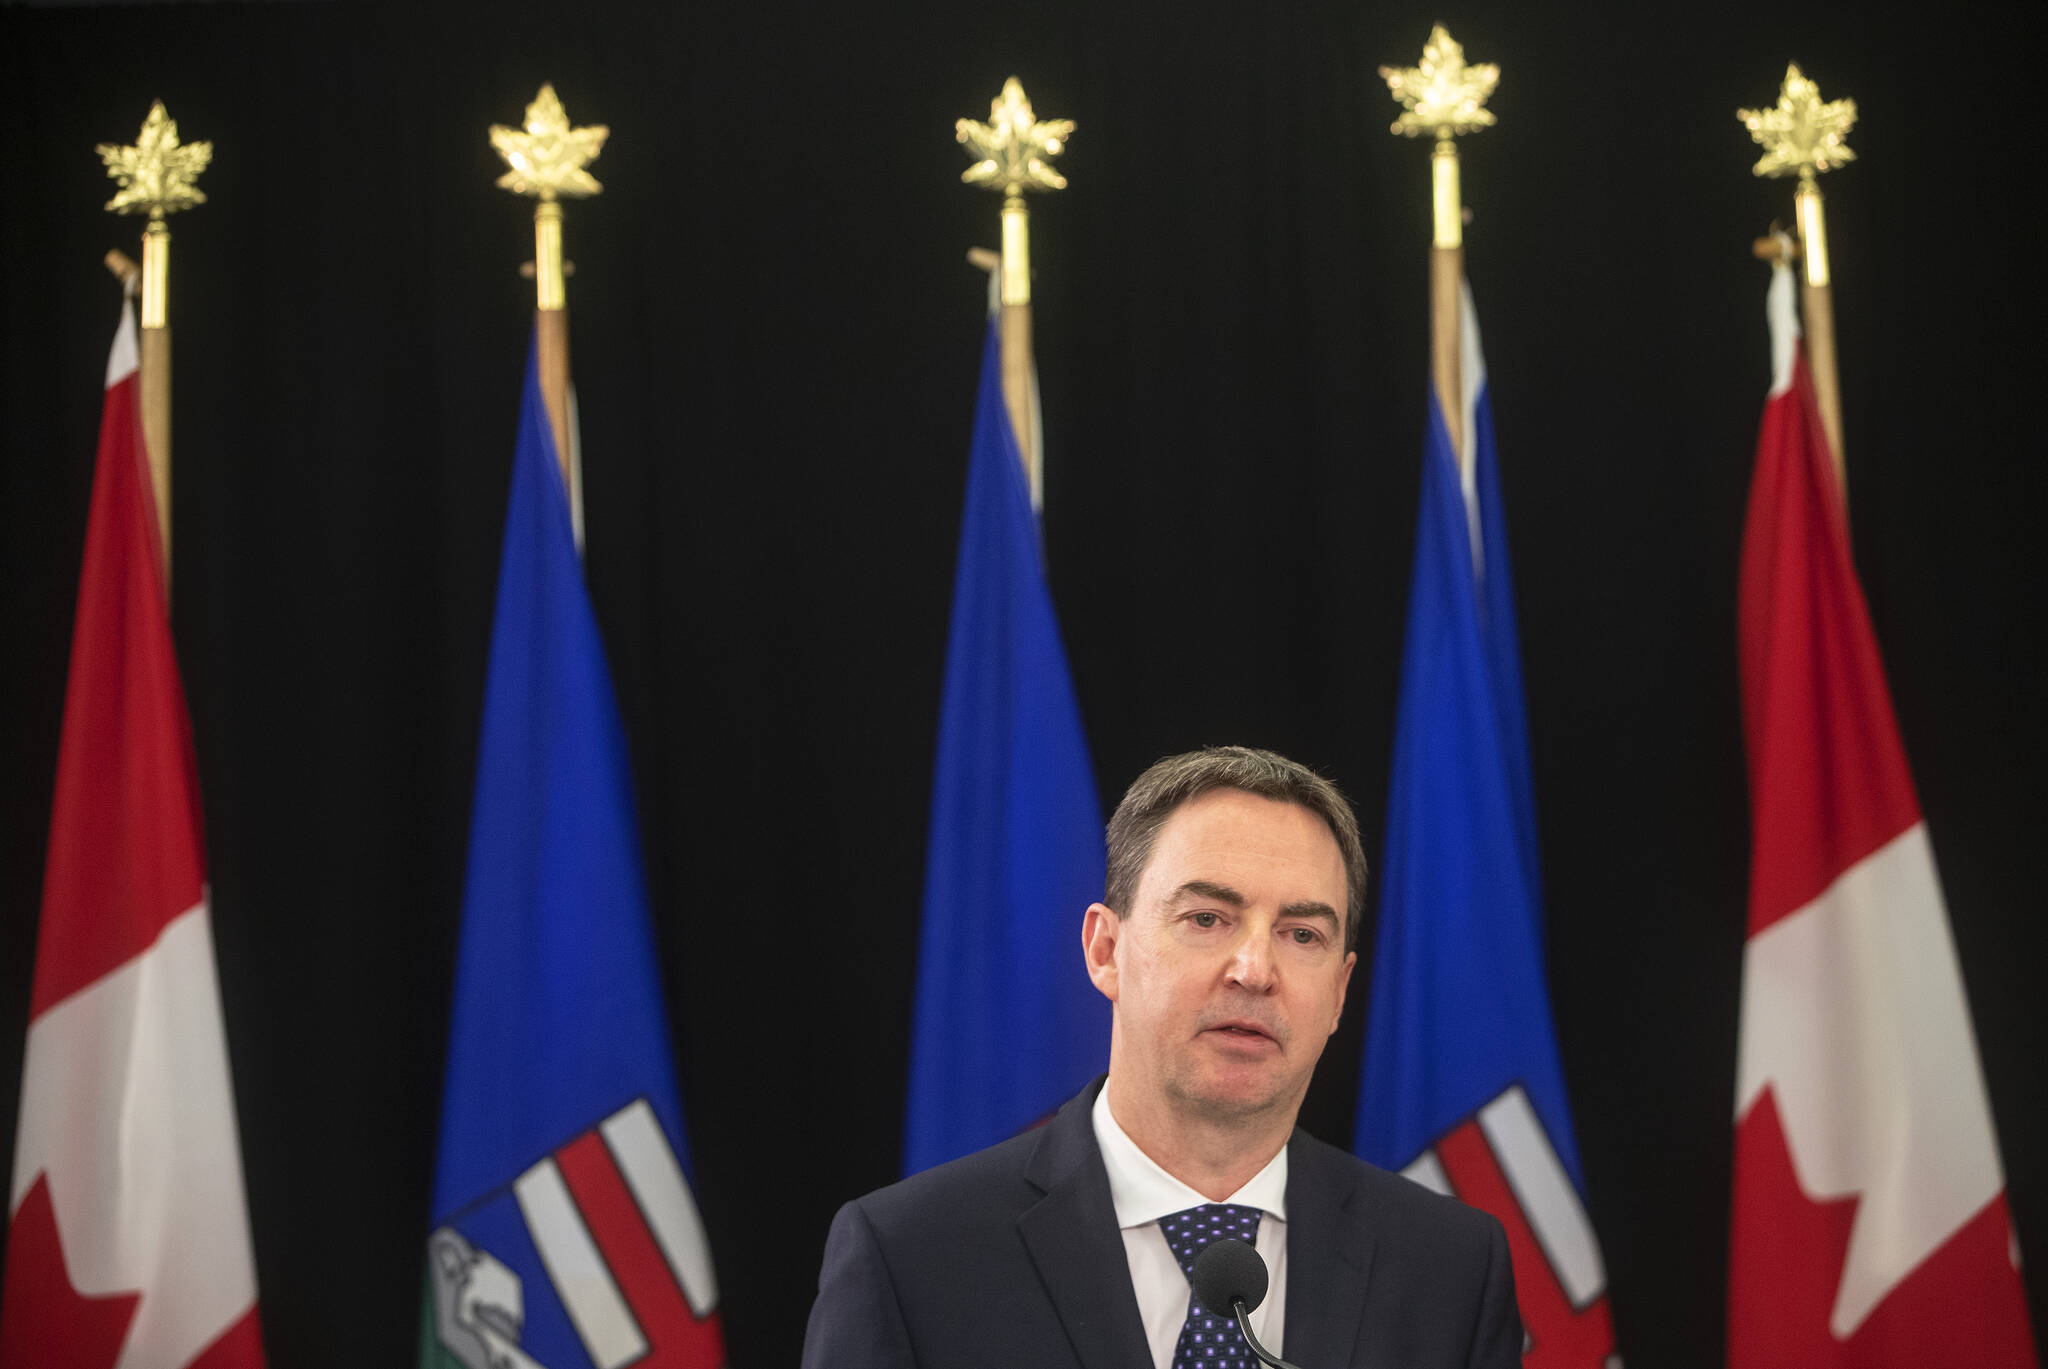 New Alberta Health Minister Jason Copping gives a COVID-19 update in Edmonton, Tuesday, Sept. 21, 2021. THE CANADIAN PRESS/Jason Franson